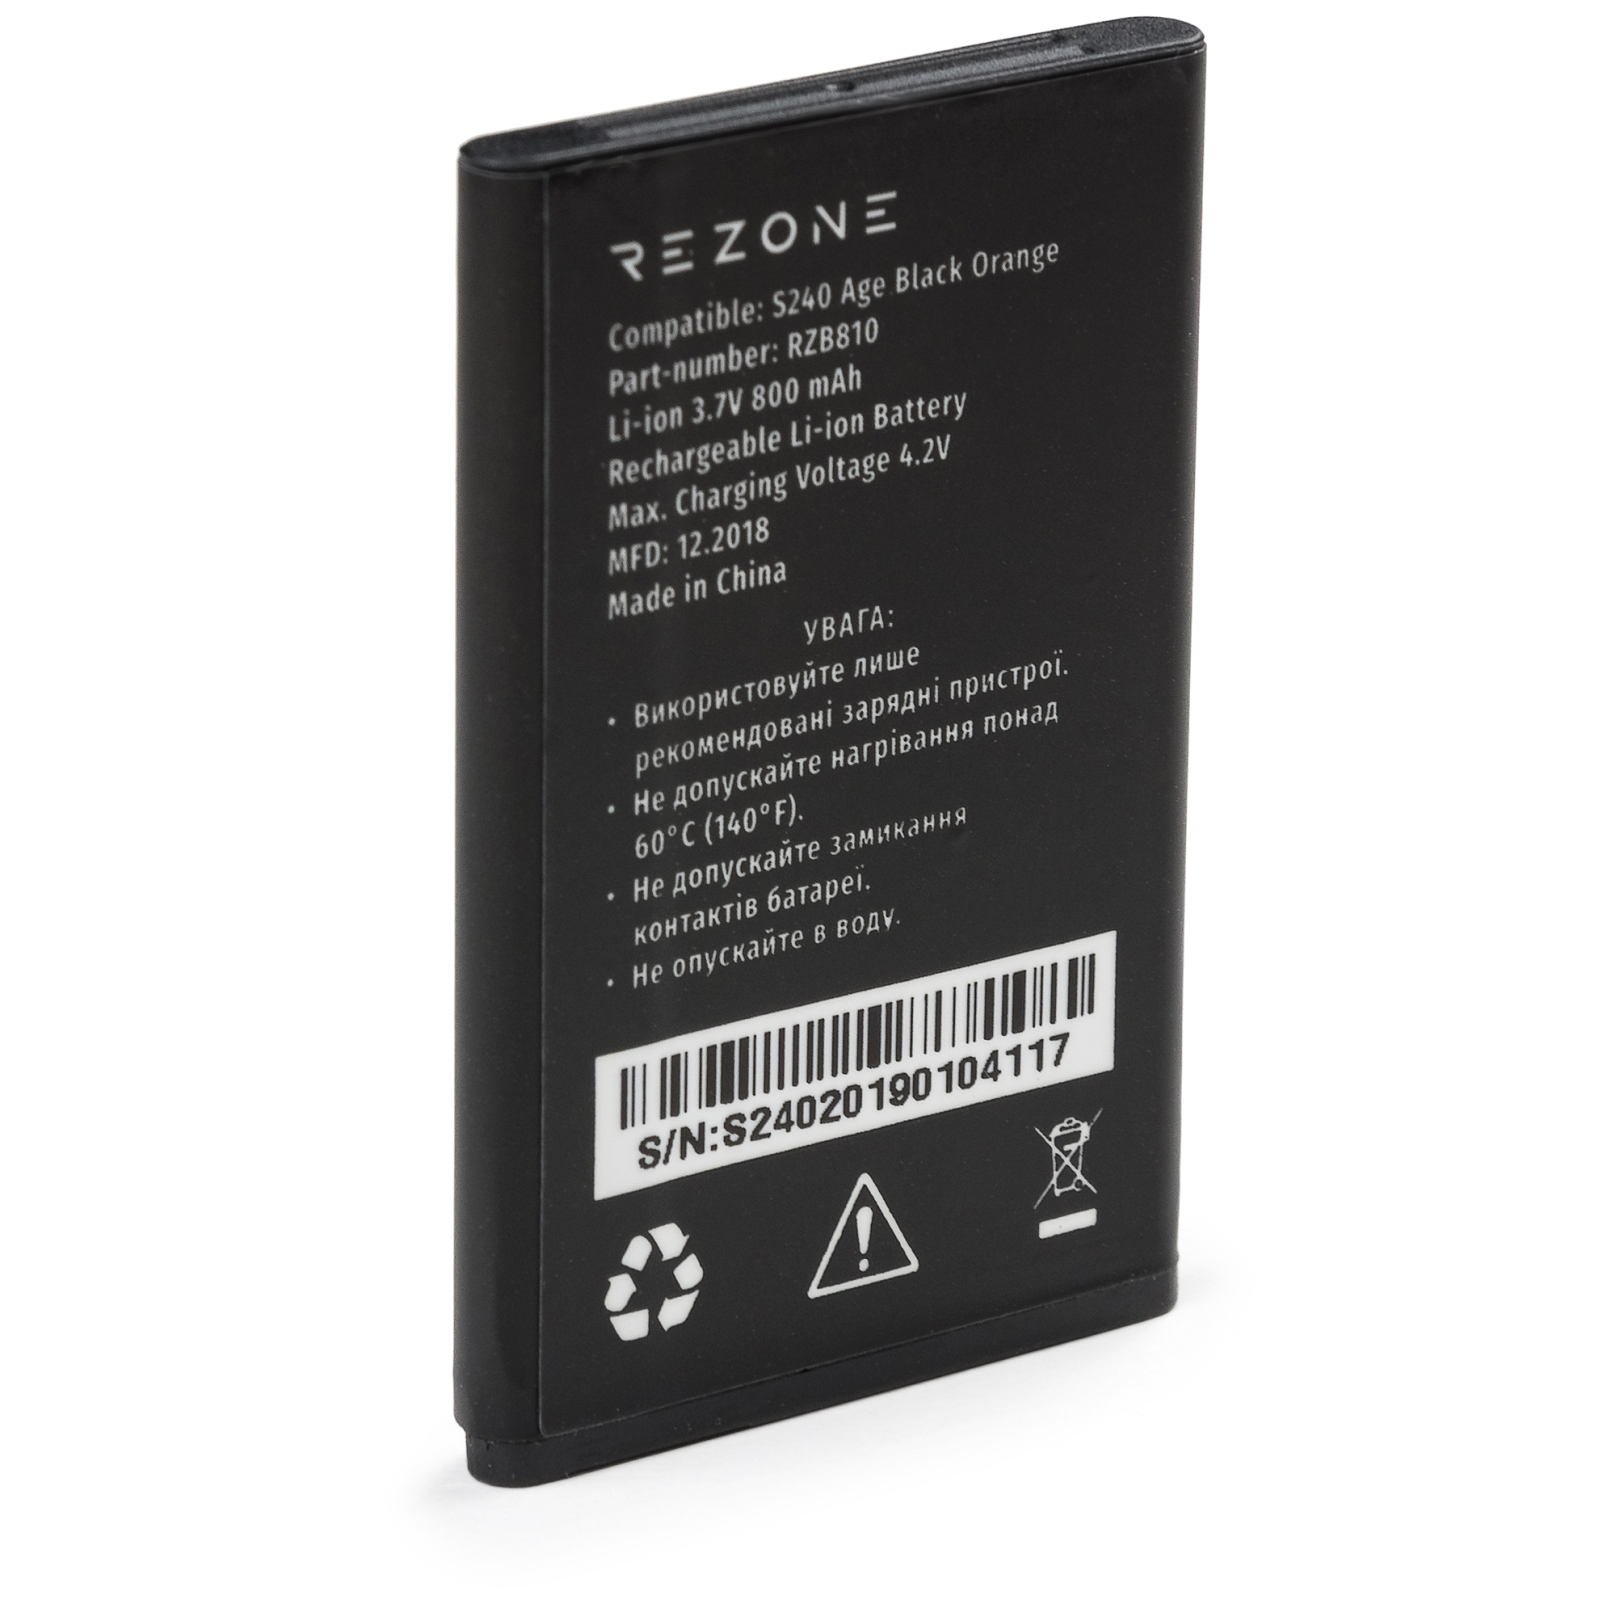 Аккумуляторная батарея Rezone for S240 Age / A170 Point 800mah (compatible with BL-4C) (BL-4C) изображение 2